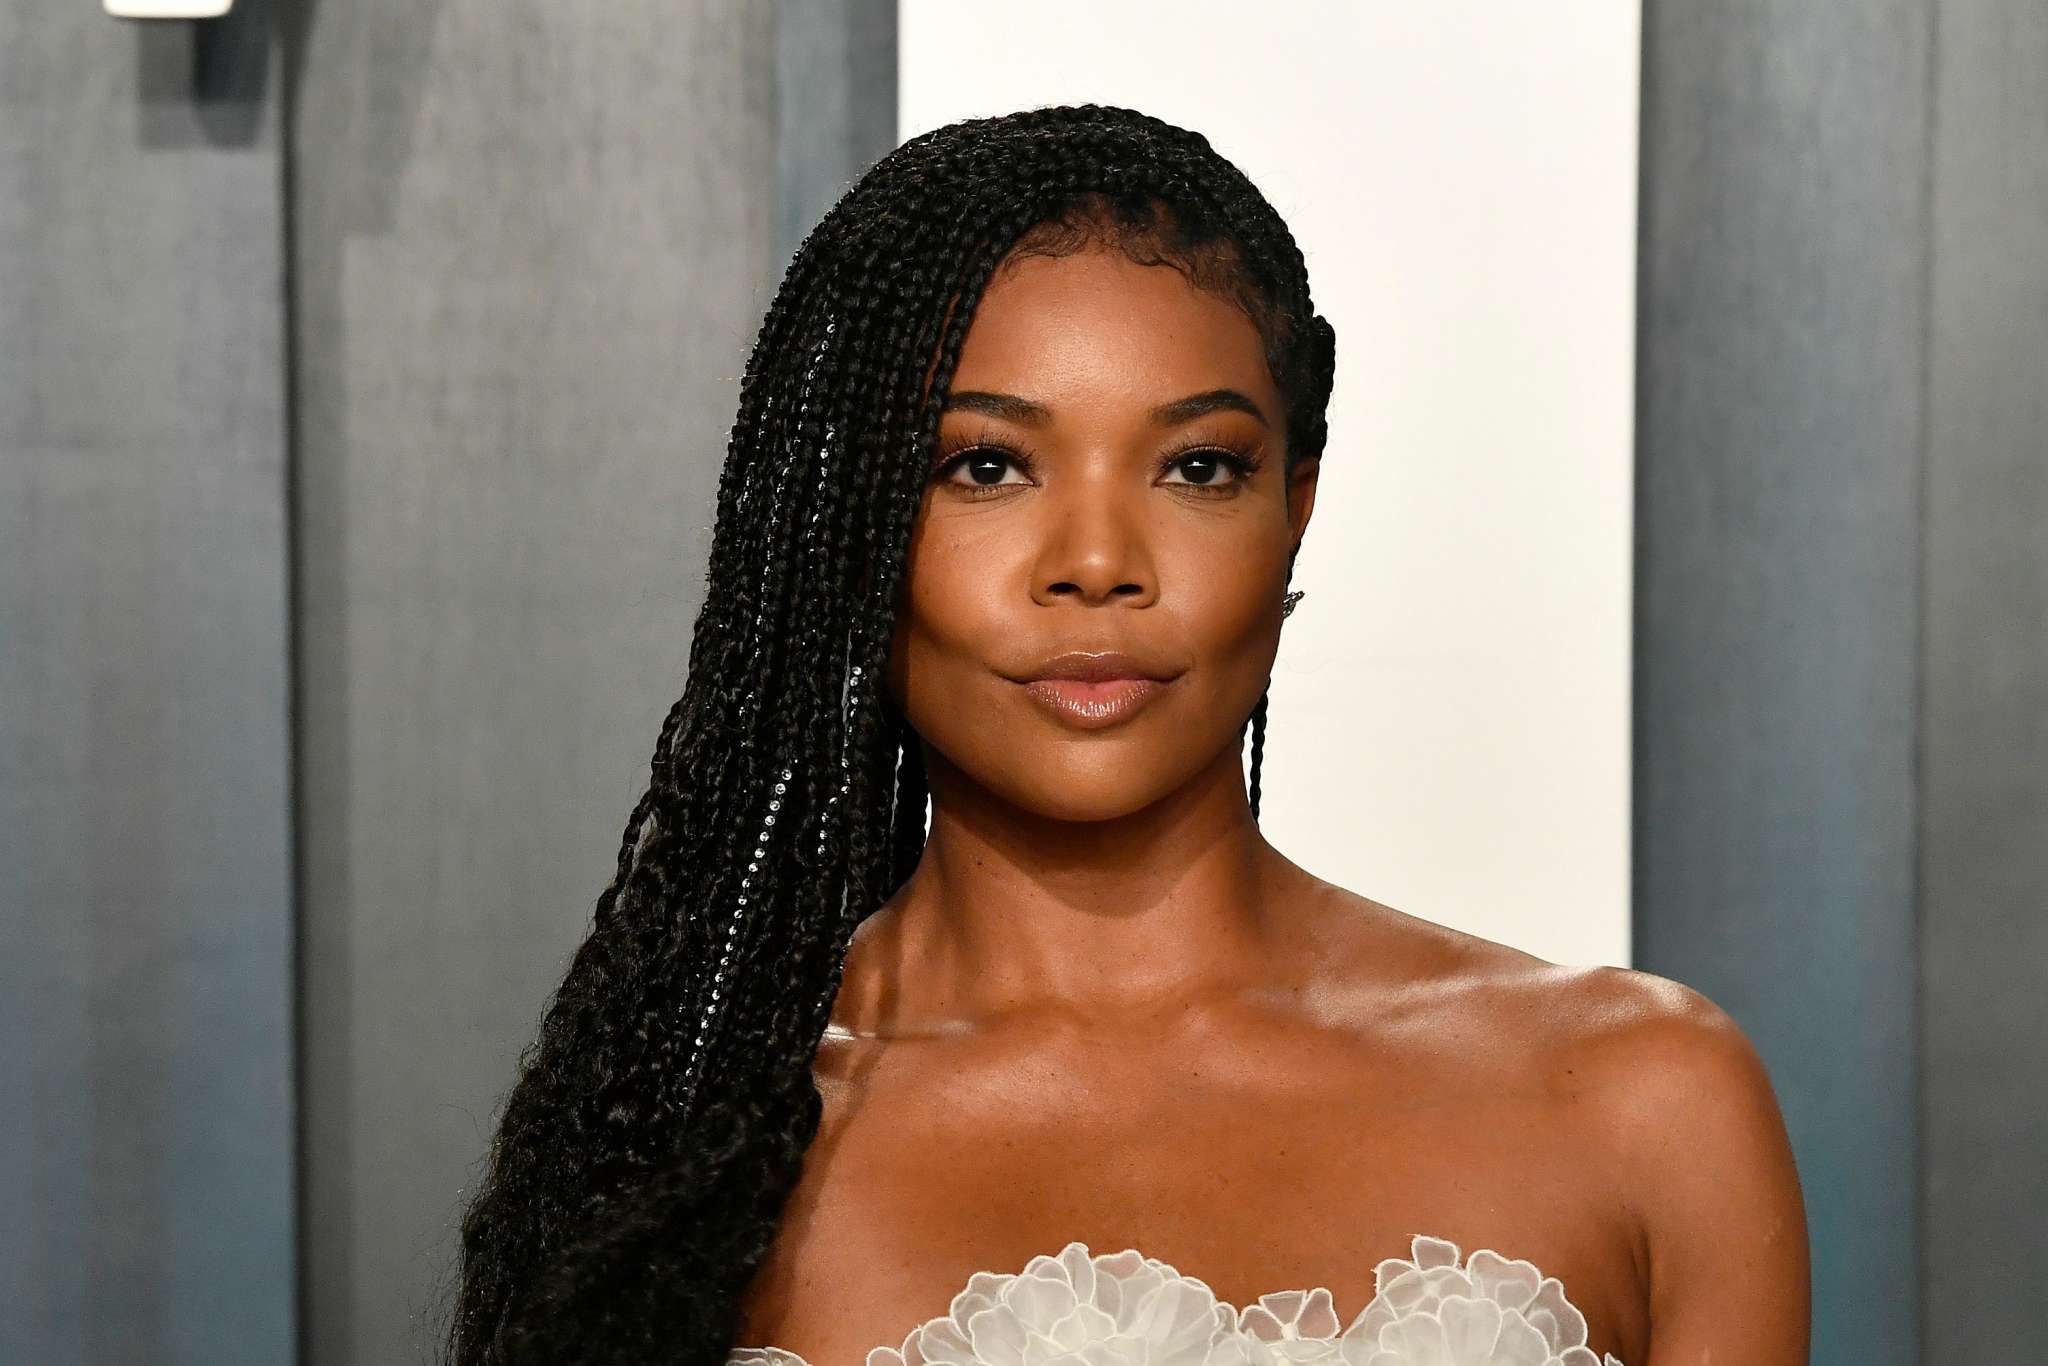 gabrielle-union-is-praising-a-special-lady-mentioned-in-forbes